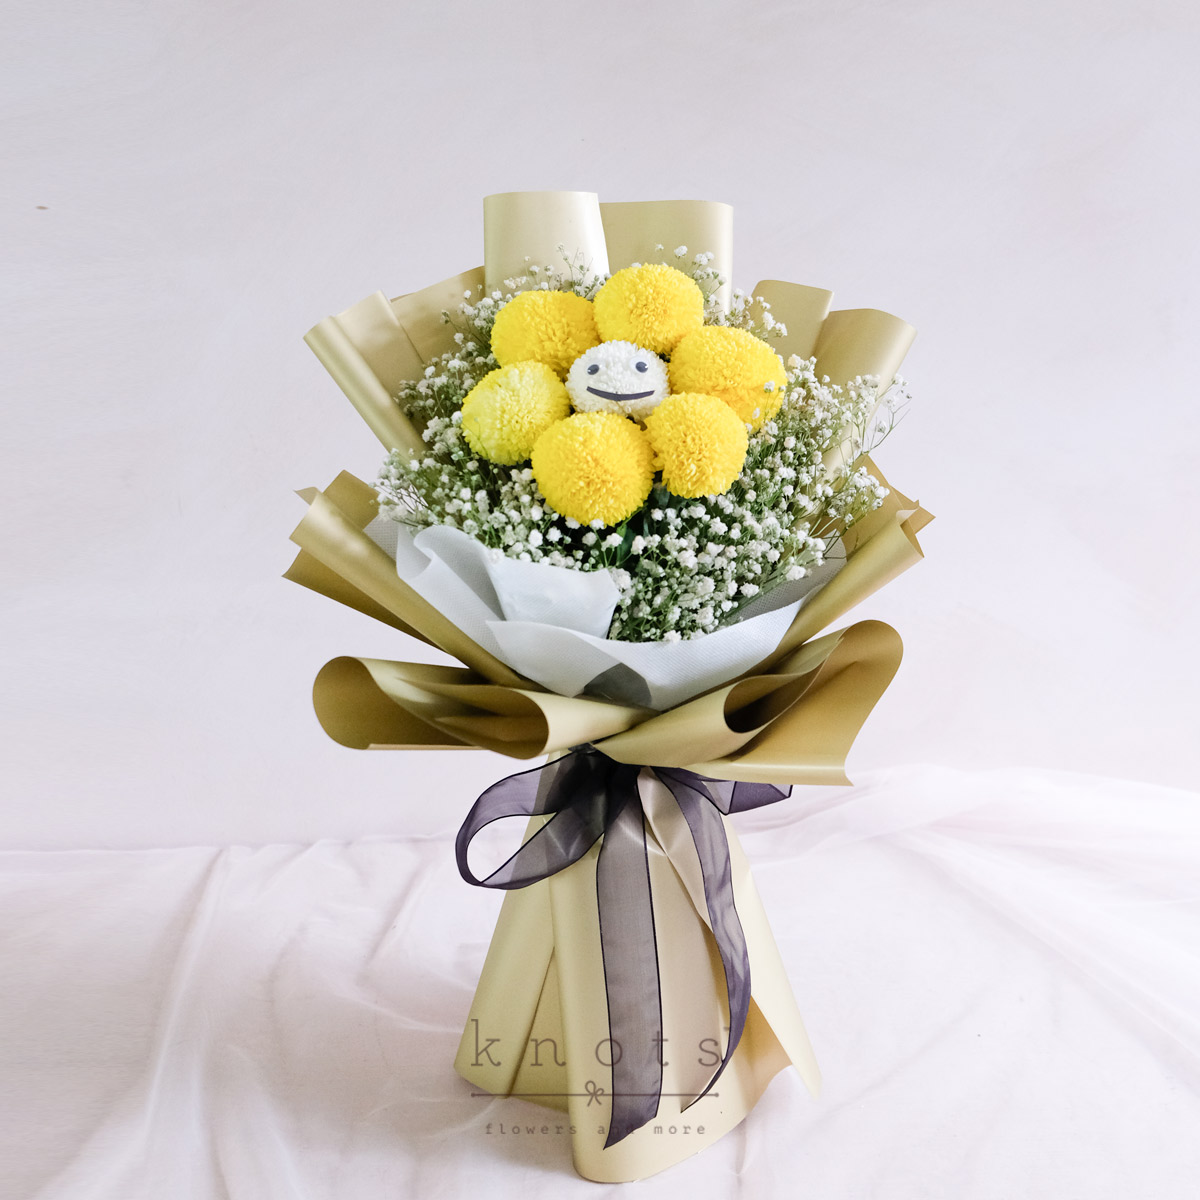 Sunny Darling (Yellow Poms Hand Bouquet)